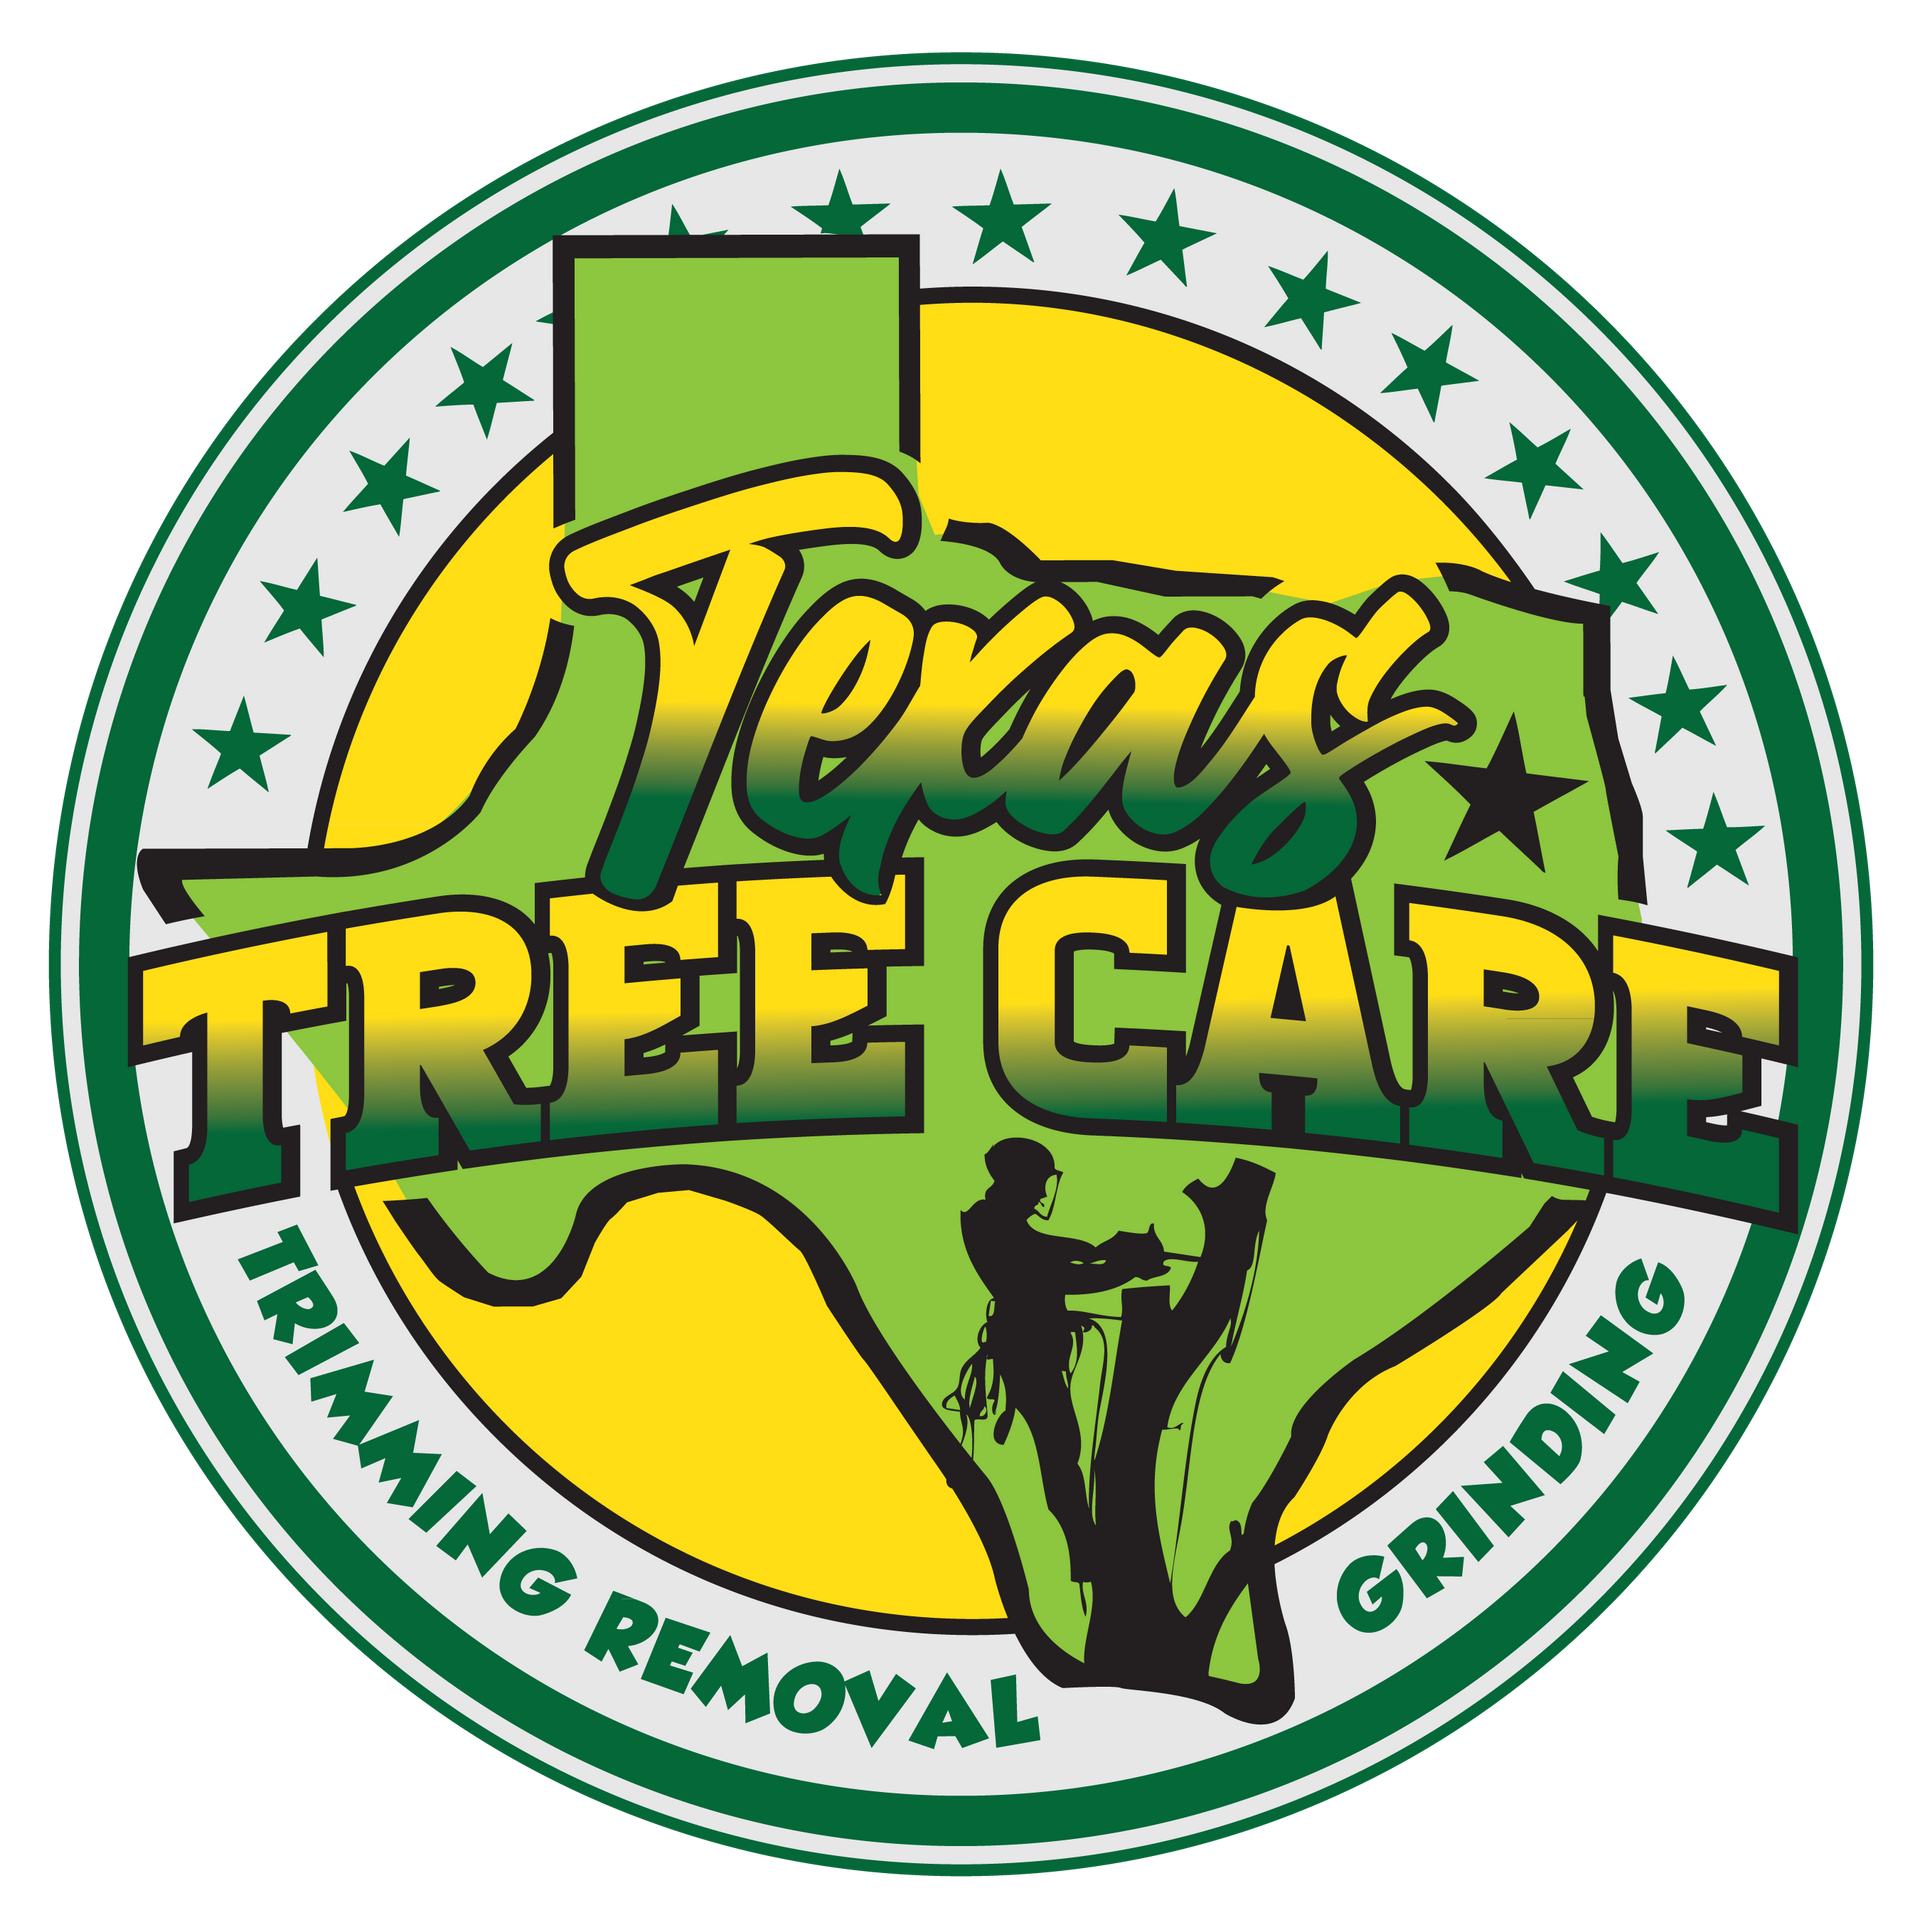 Texas Tree Care tree service in Spring, Tx